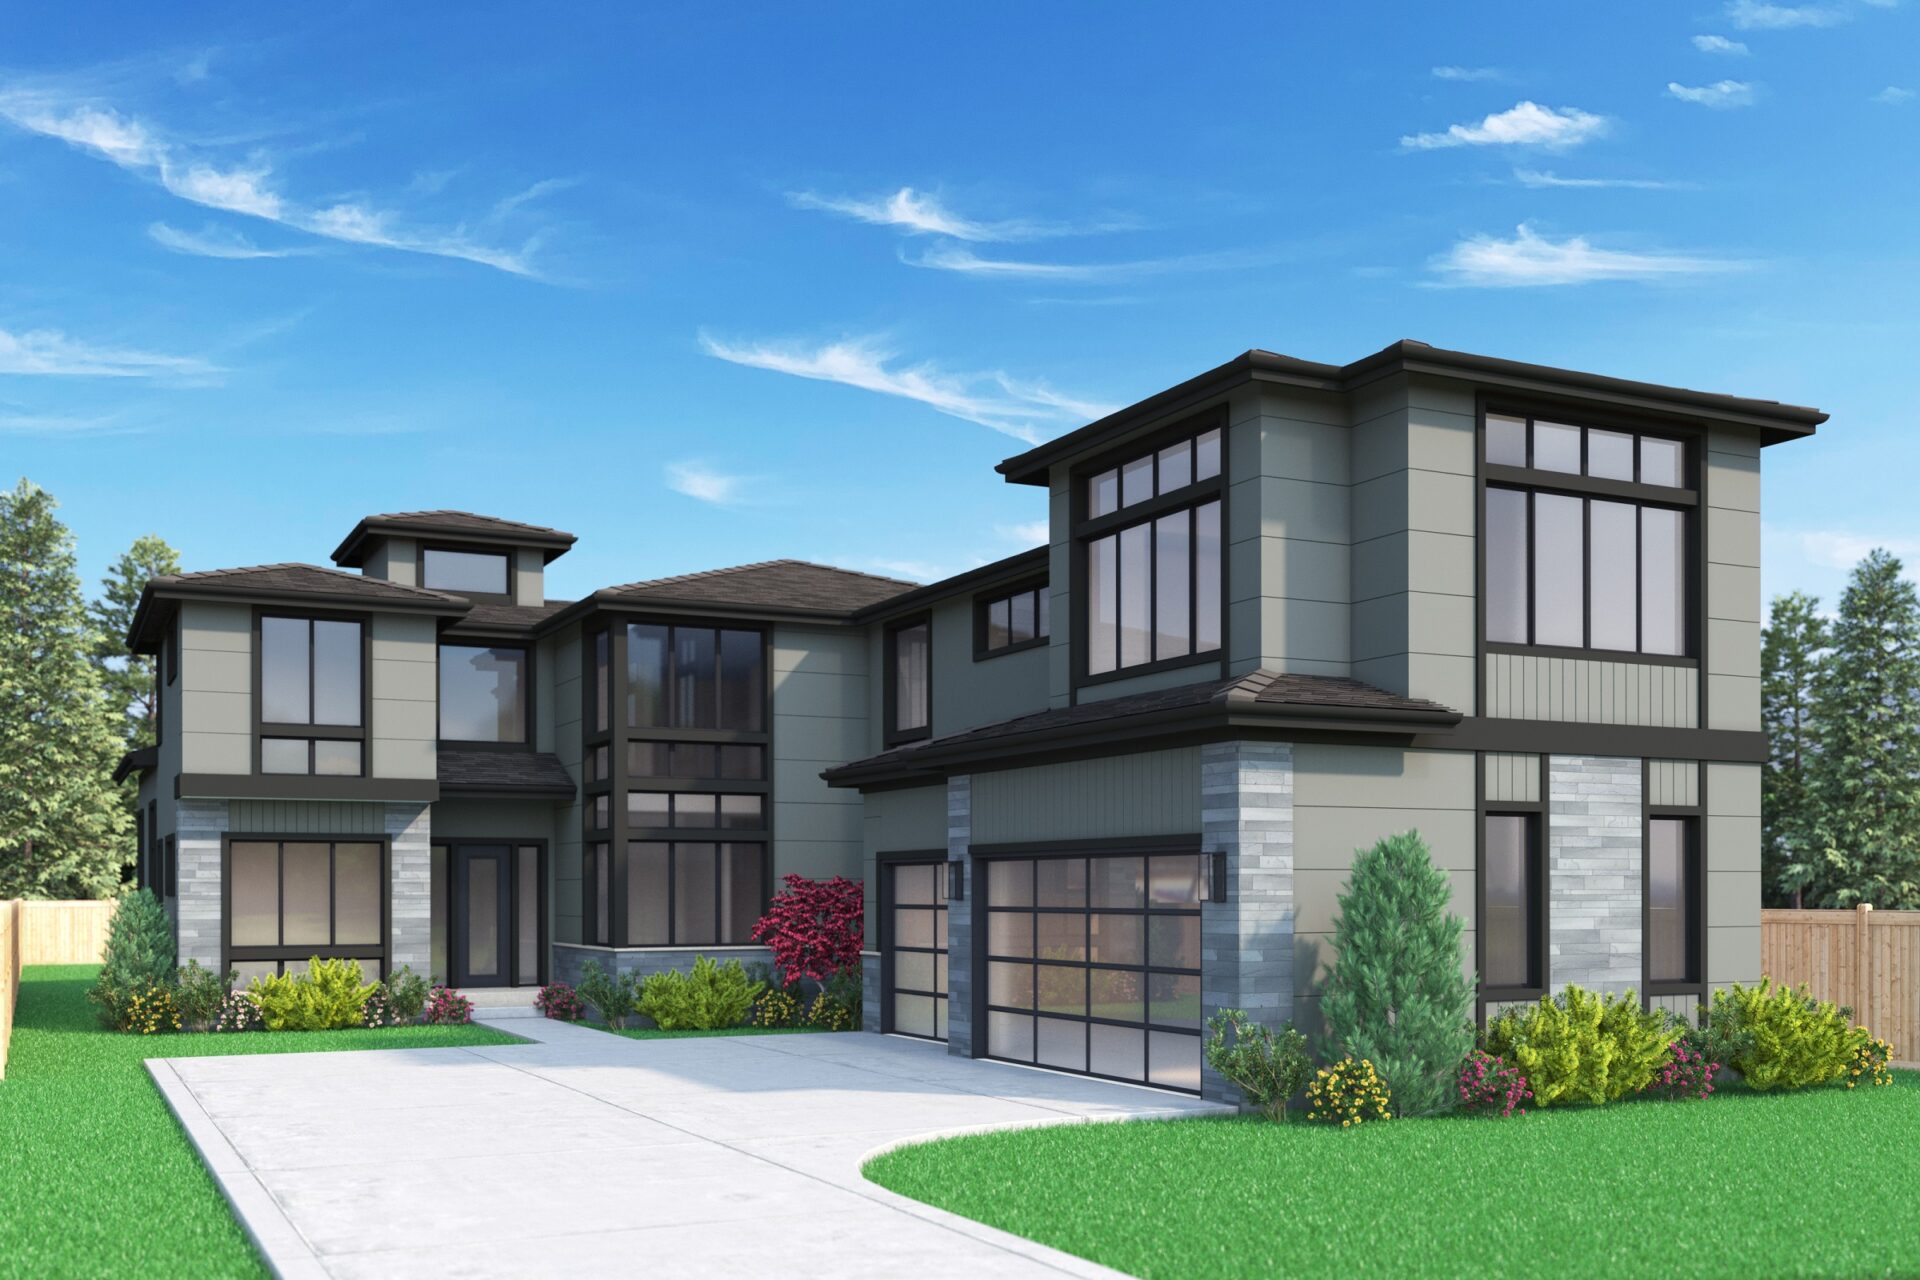 View our new luxury home construction on 4008 139th Ave SE, in Bellevue, WA from MN Custom Homes